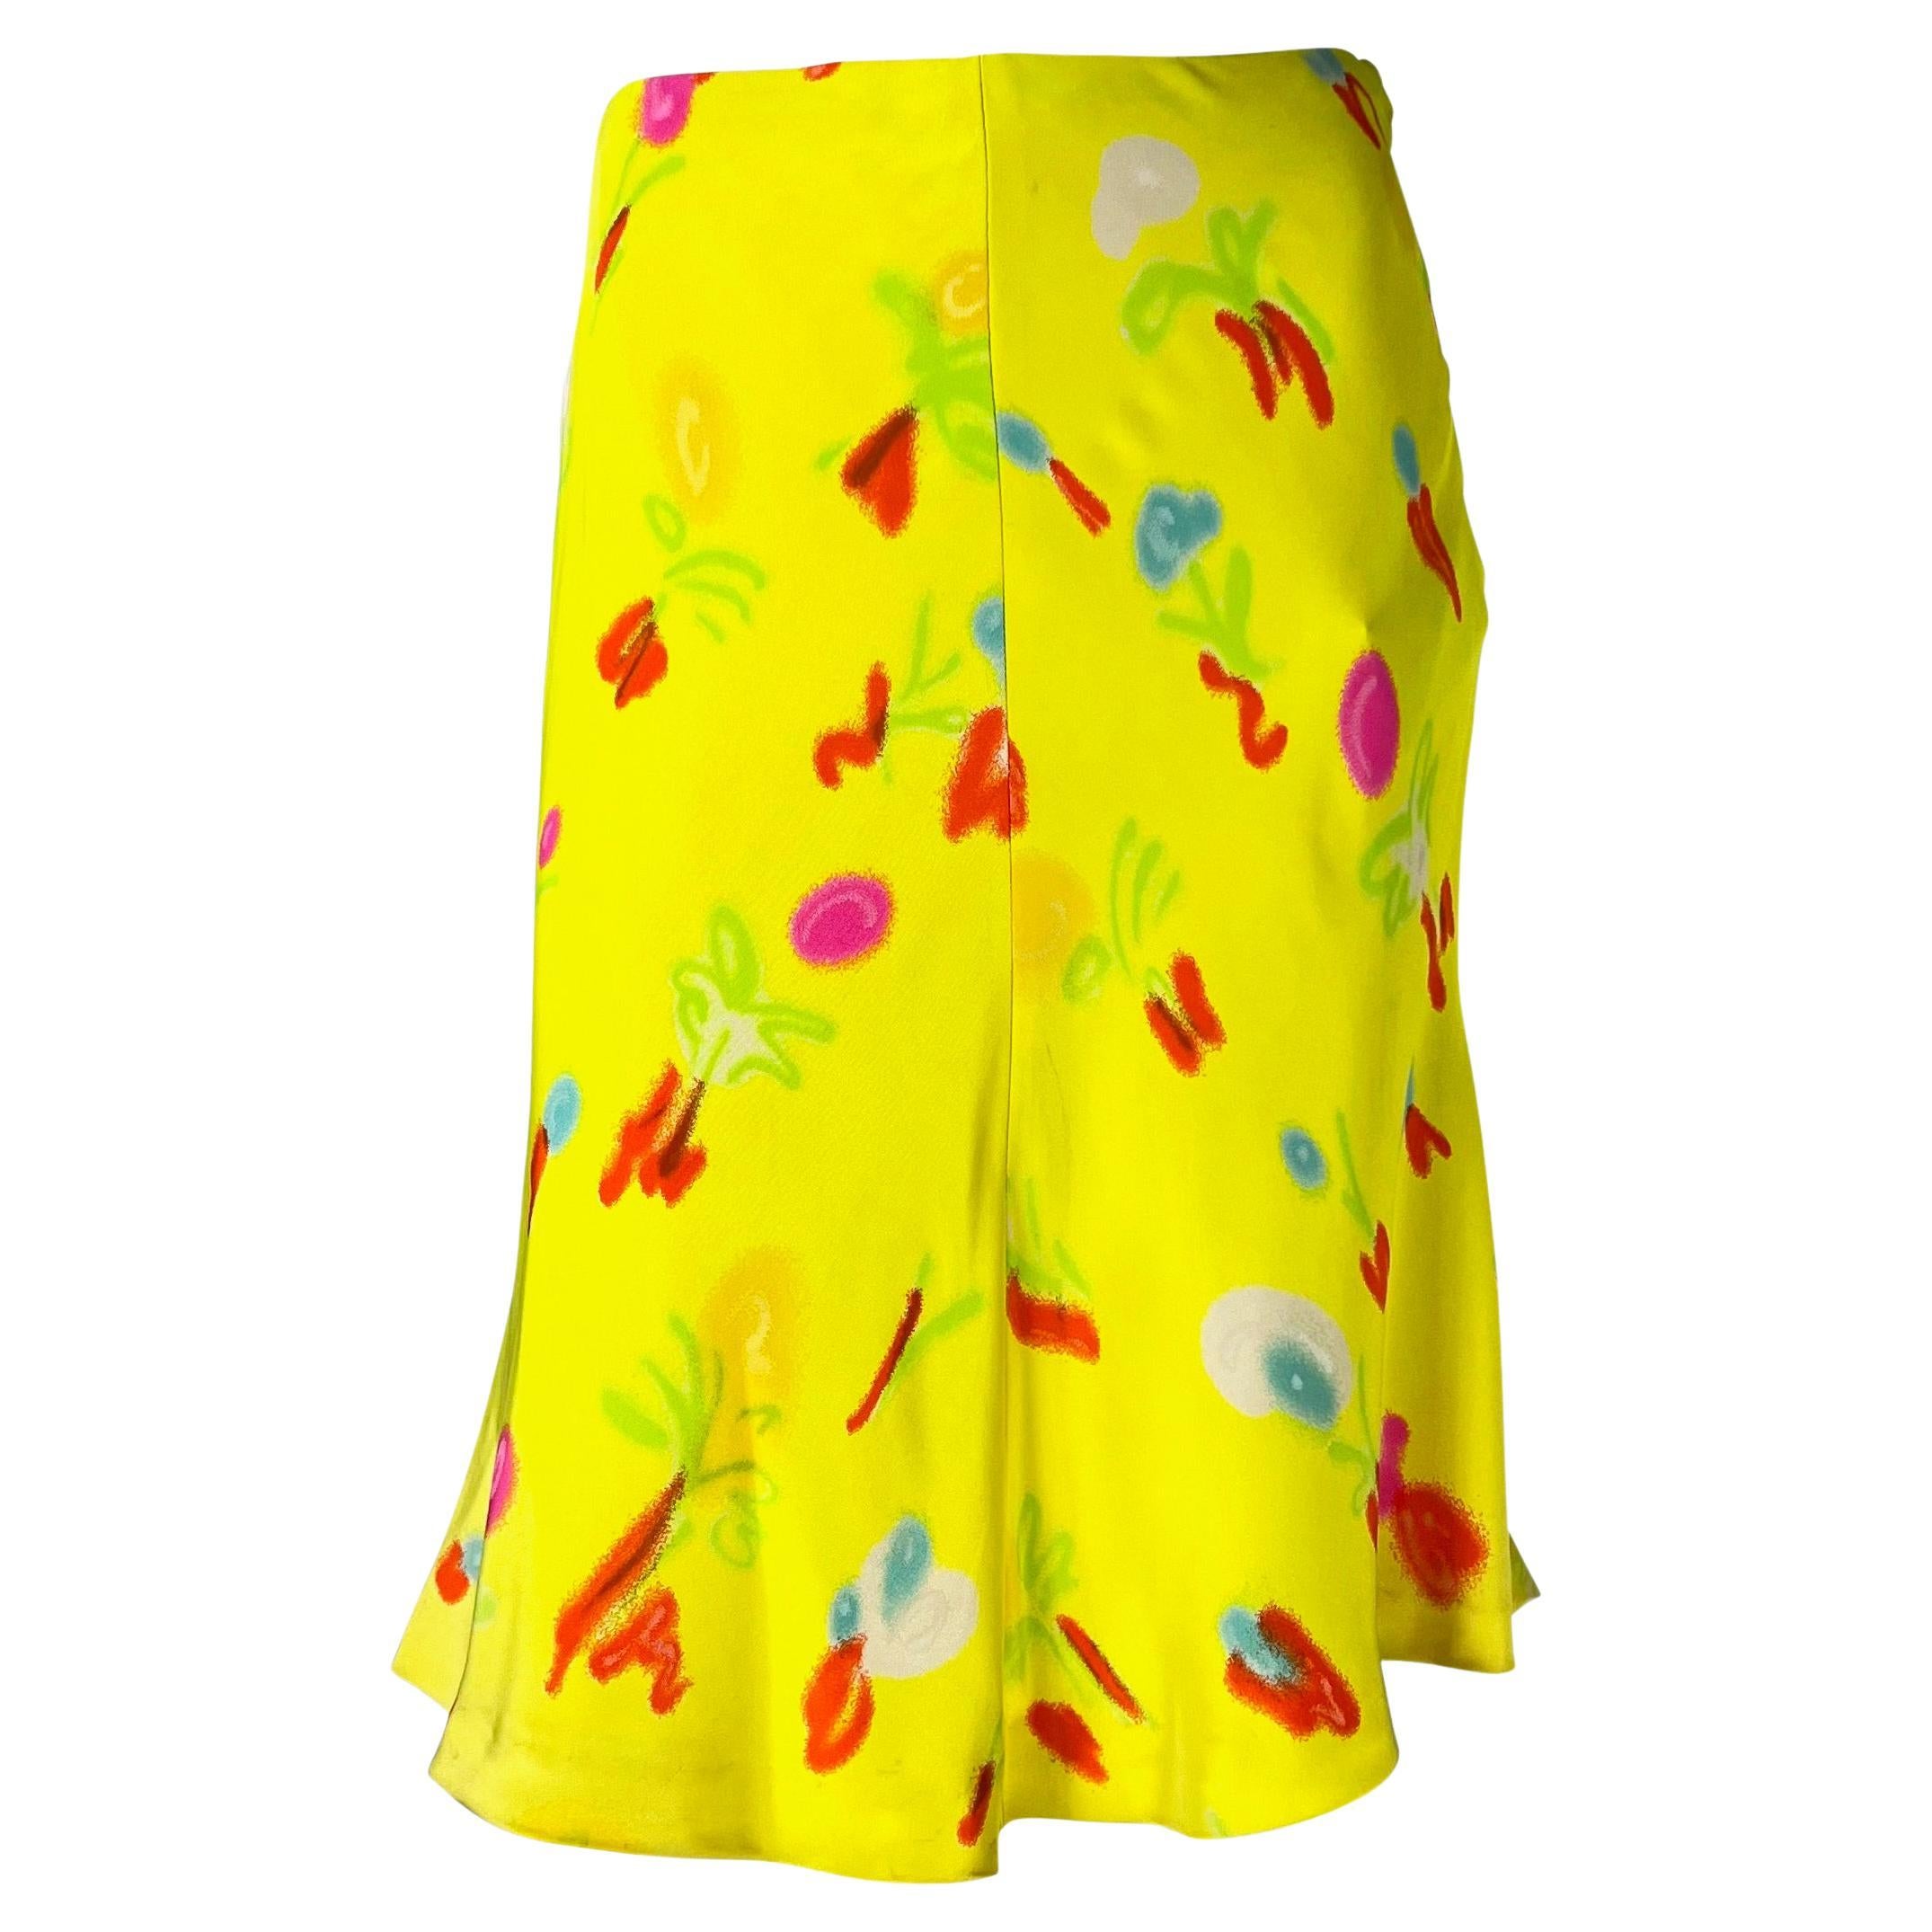 NWT S/S 1996 Gianni Versace Couture Neon Yellow Graffiti Floral Print Skirt For Sale